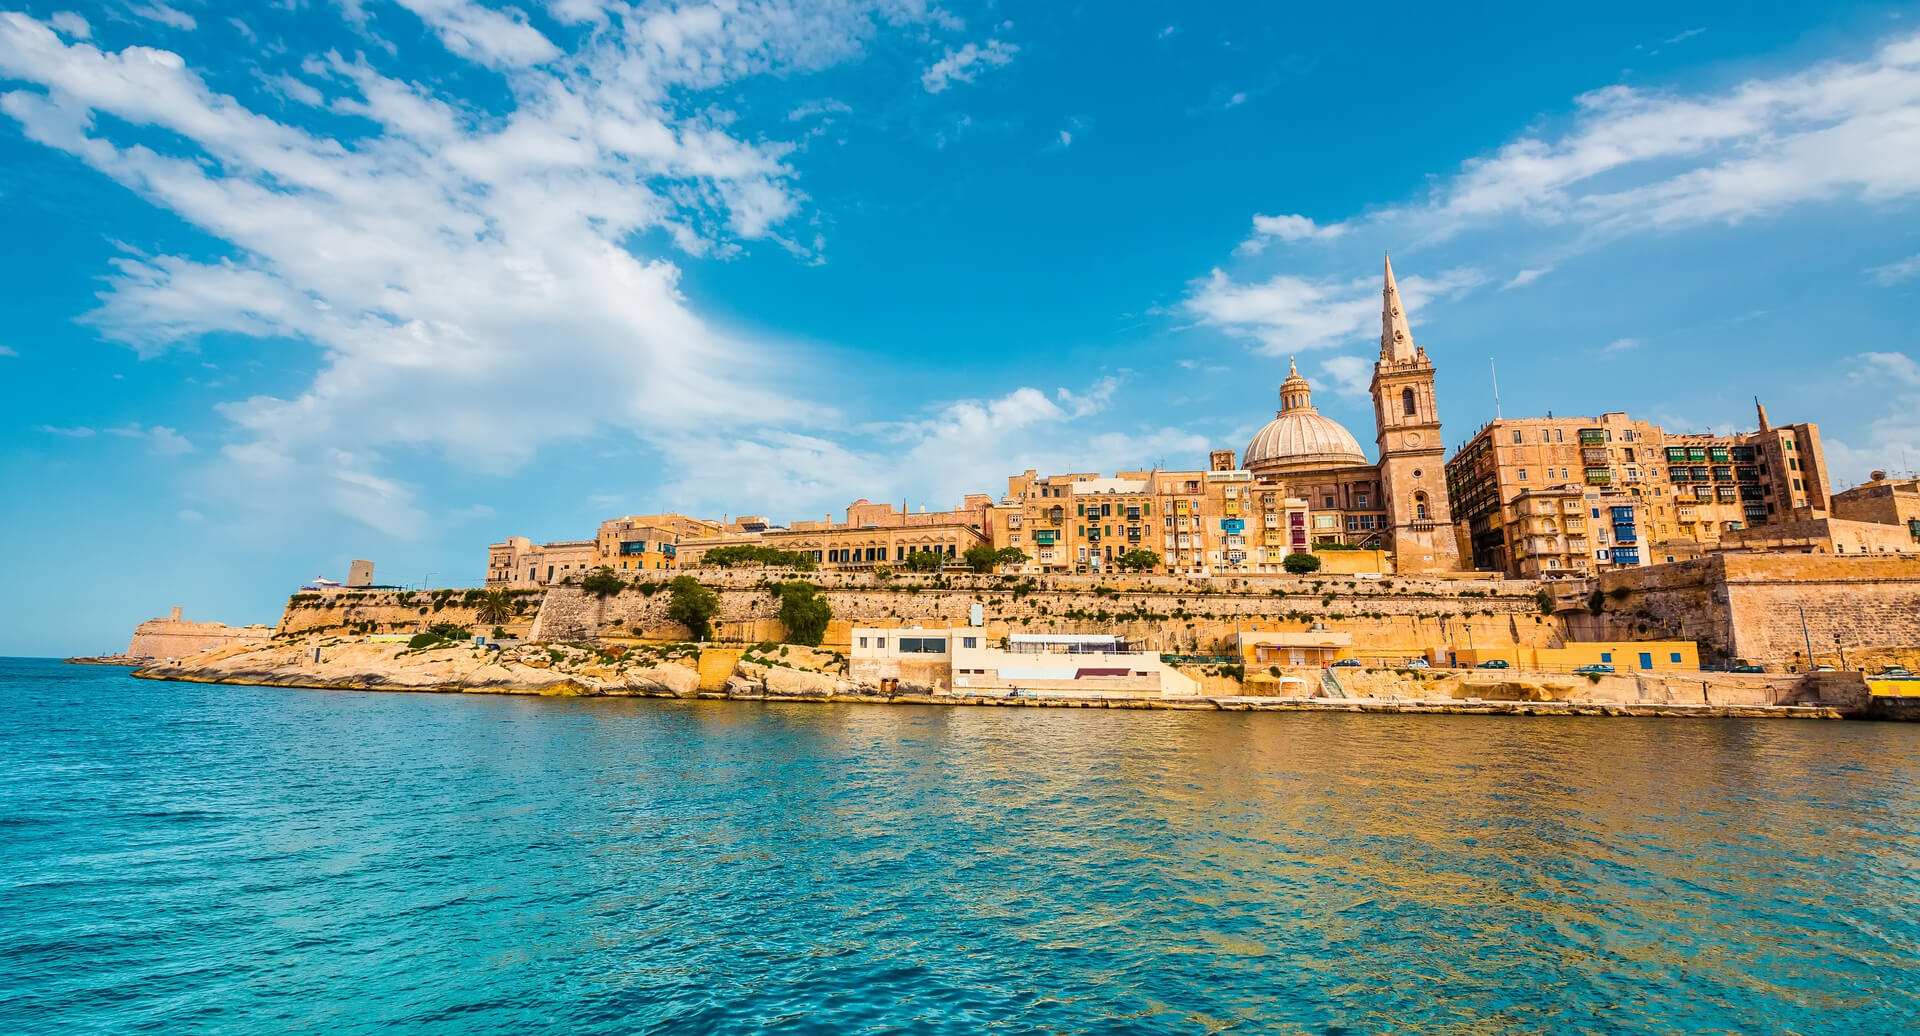 view on Valletta with its architecture from the sea